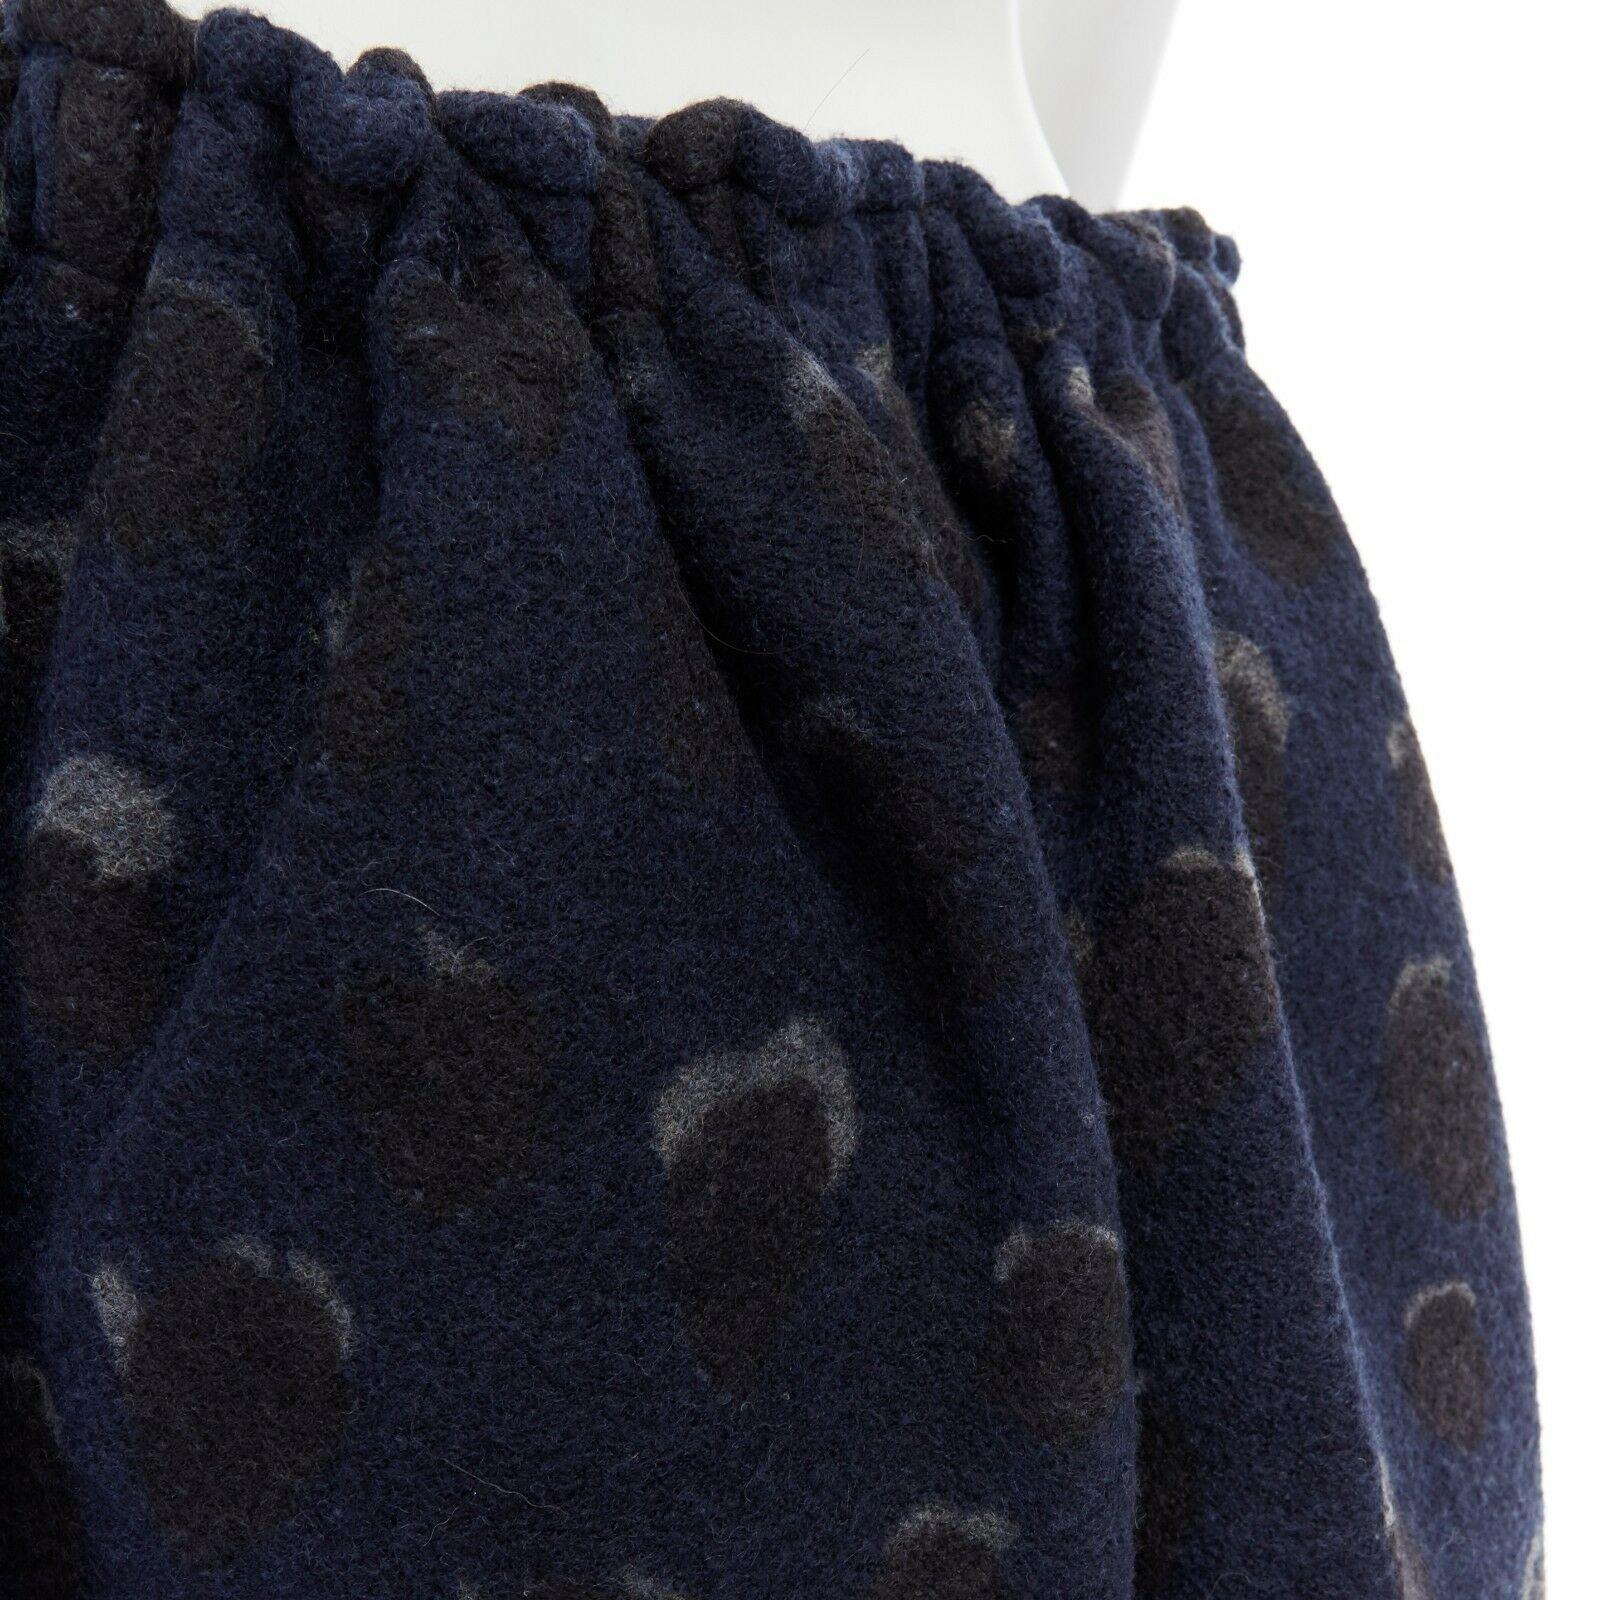 ACNE STUDIOS navy blue spot wool dropped crotch flared culotte pants FR36 S 
Reference: JETI/A00125 
Brand: Acne Studios 
Material: Unknown 
Color: Blue 
Pattern: Polka Dot 
Closure: Drawstring 
Extra Detail: Feels like wool. Navy blue with grey and